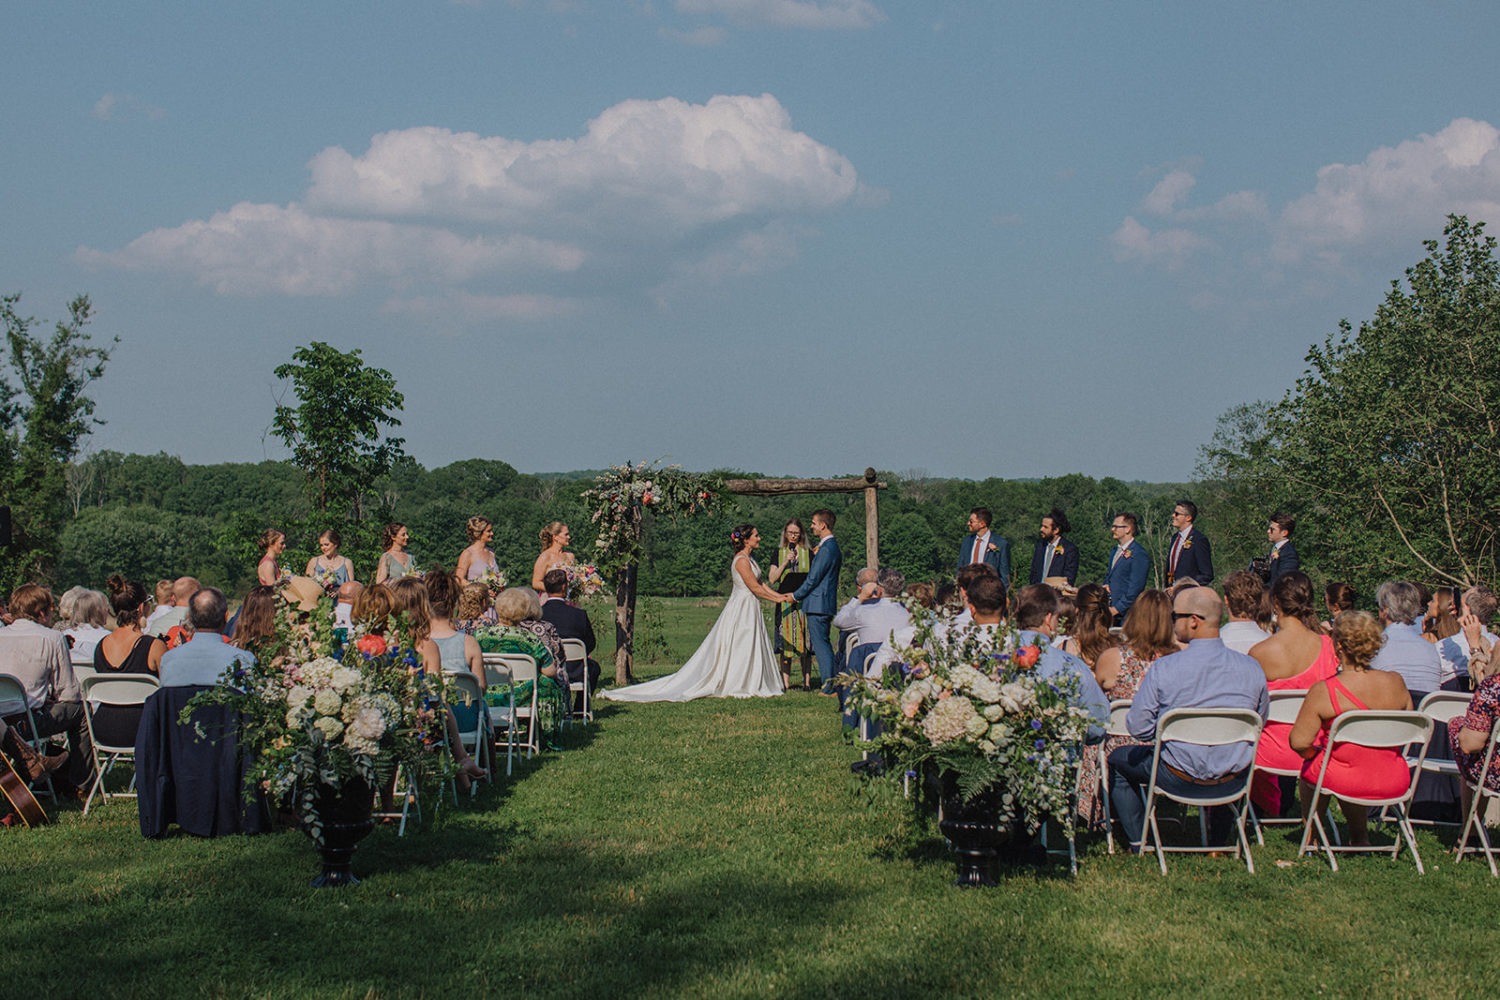 Couple exchanges vows during outdoor floral wedding ceremony